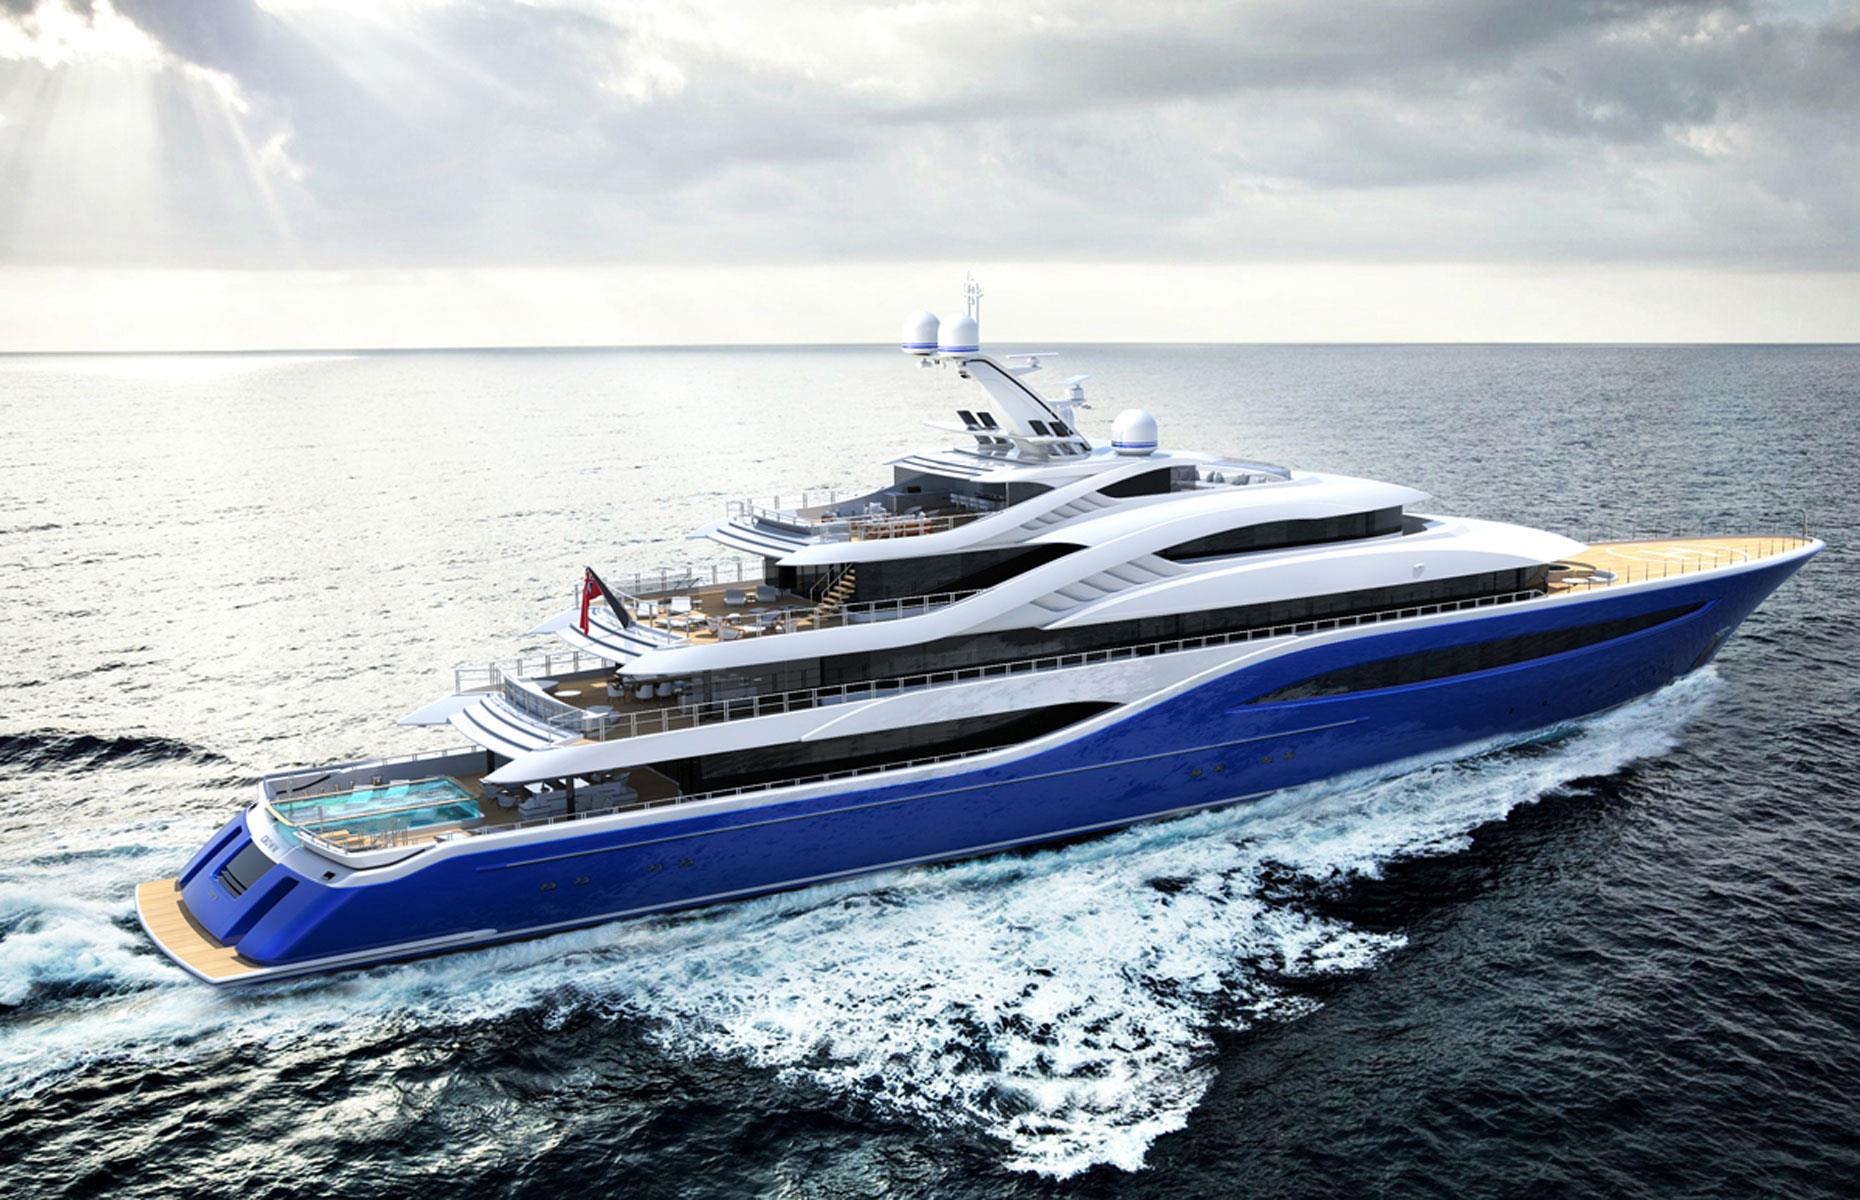 <p>The interiors are just as eye-catching, with the superyacht boasting a wealth of features.</p>  <p>For the billionaire who has everything, there's a helipad that can also be used as an outdoor movie theater and basketball court. But the <em>pièce de résistance</em> has to be the incredible 21-foot glass-sided swimming pool on the lowest deck.</p>